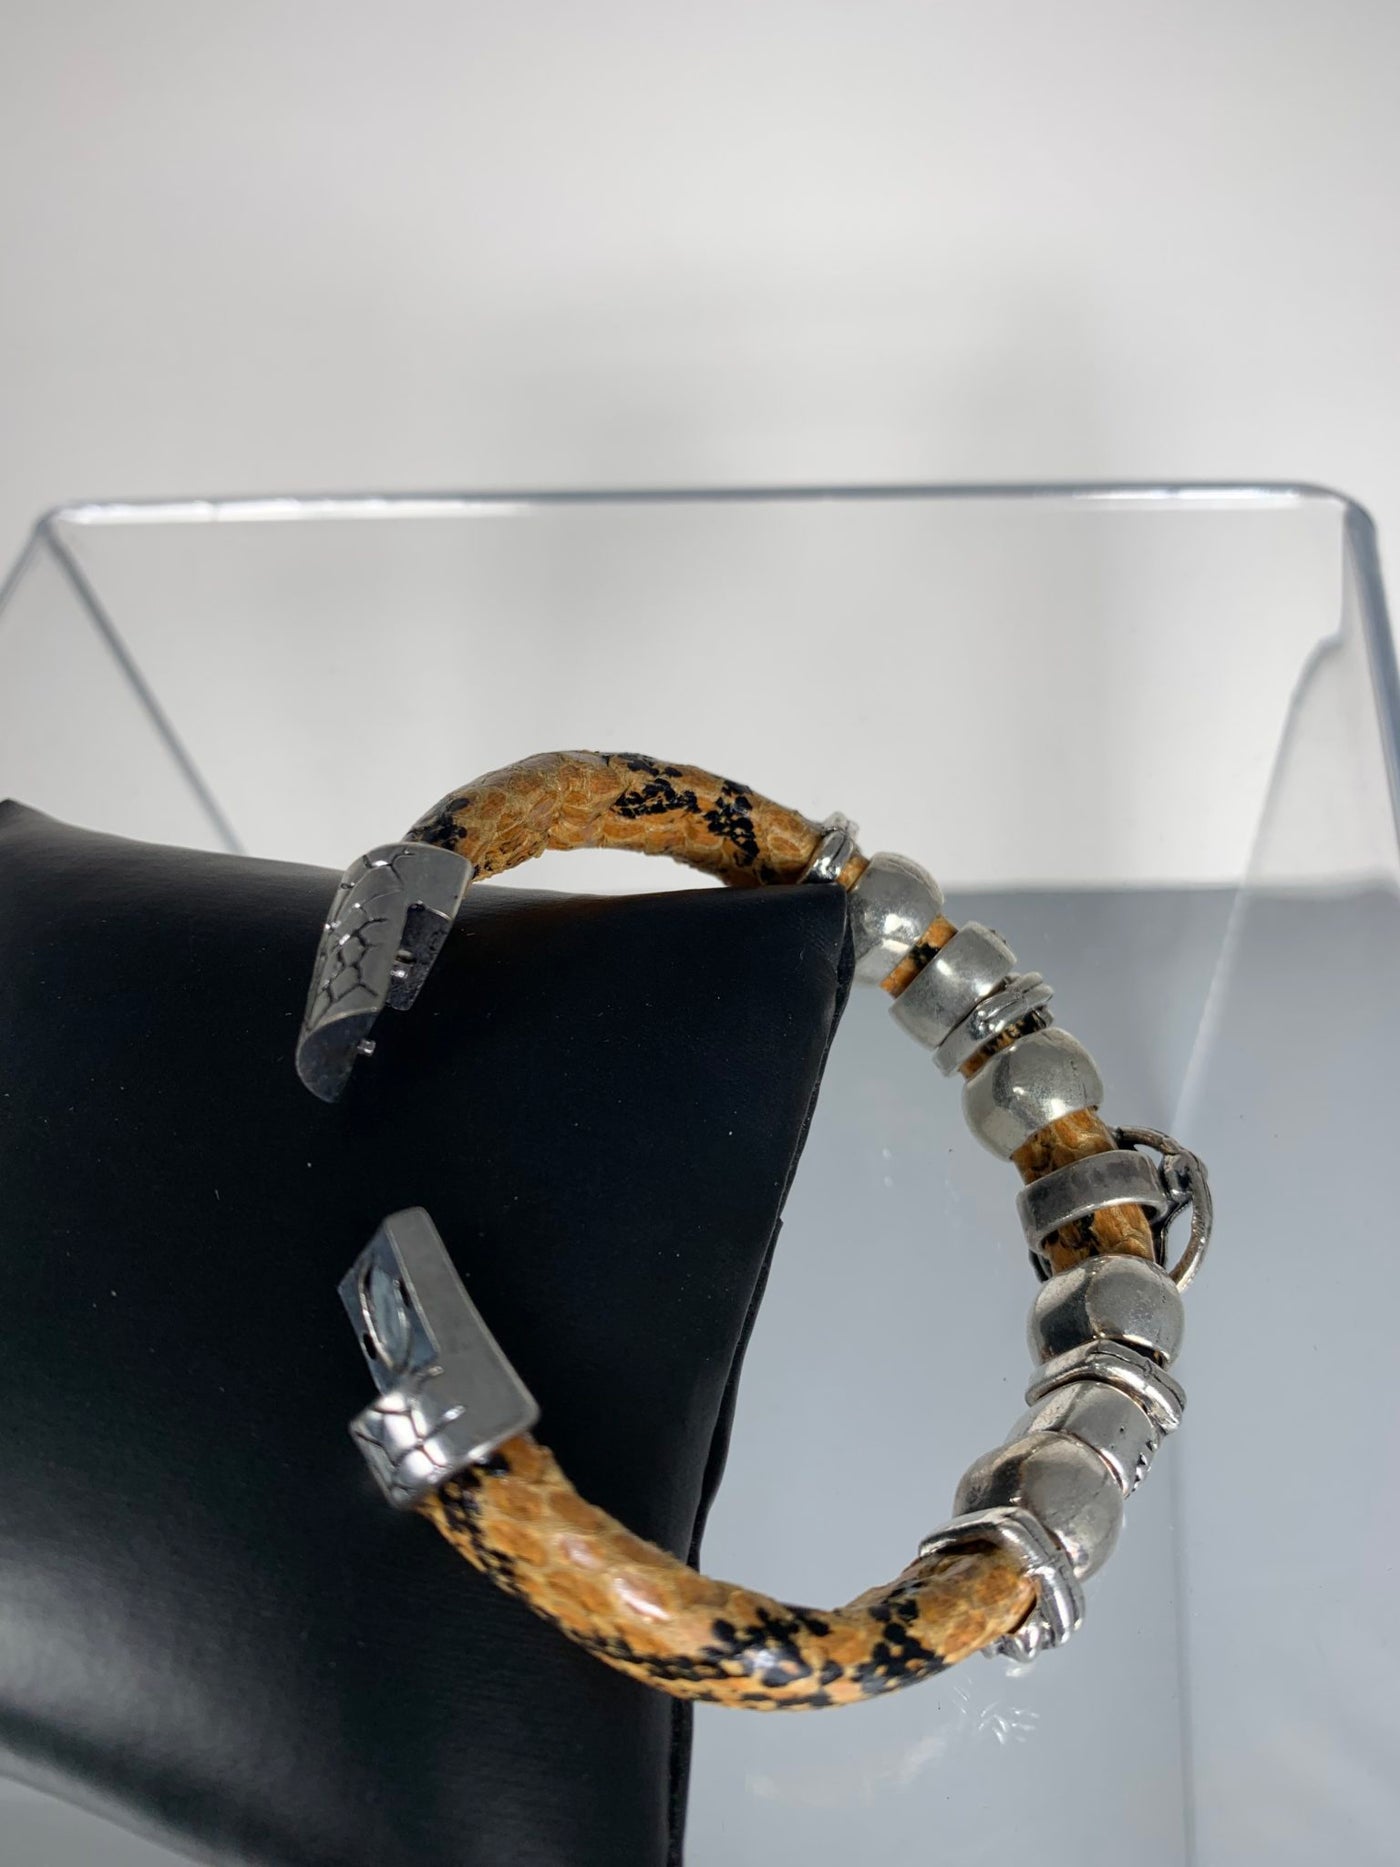 Yellow Faux Snake Skin Band Bracelet Featuring a Bird